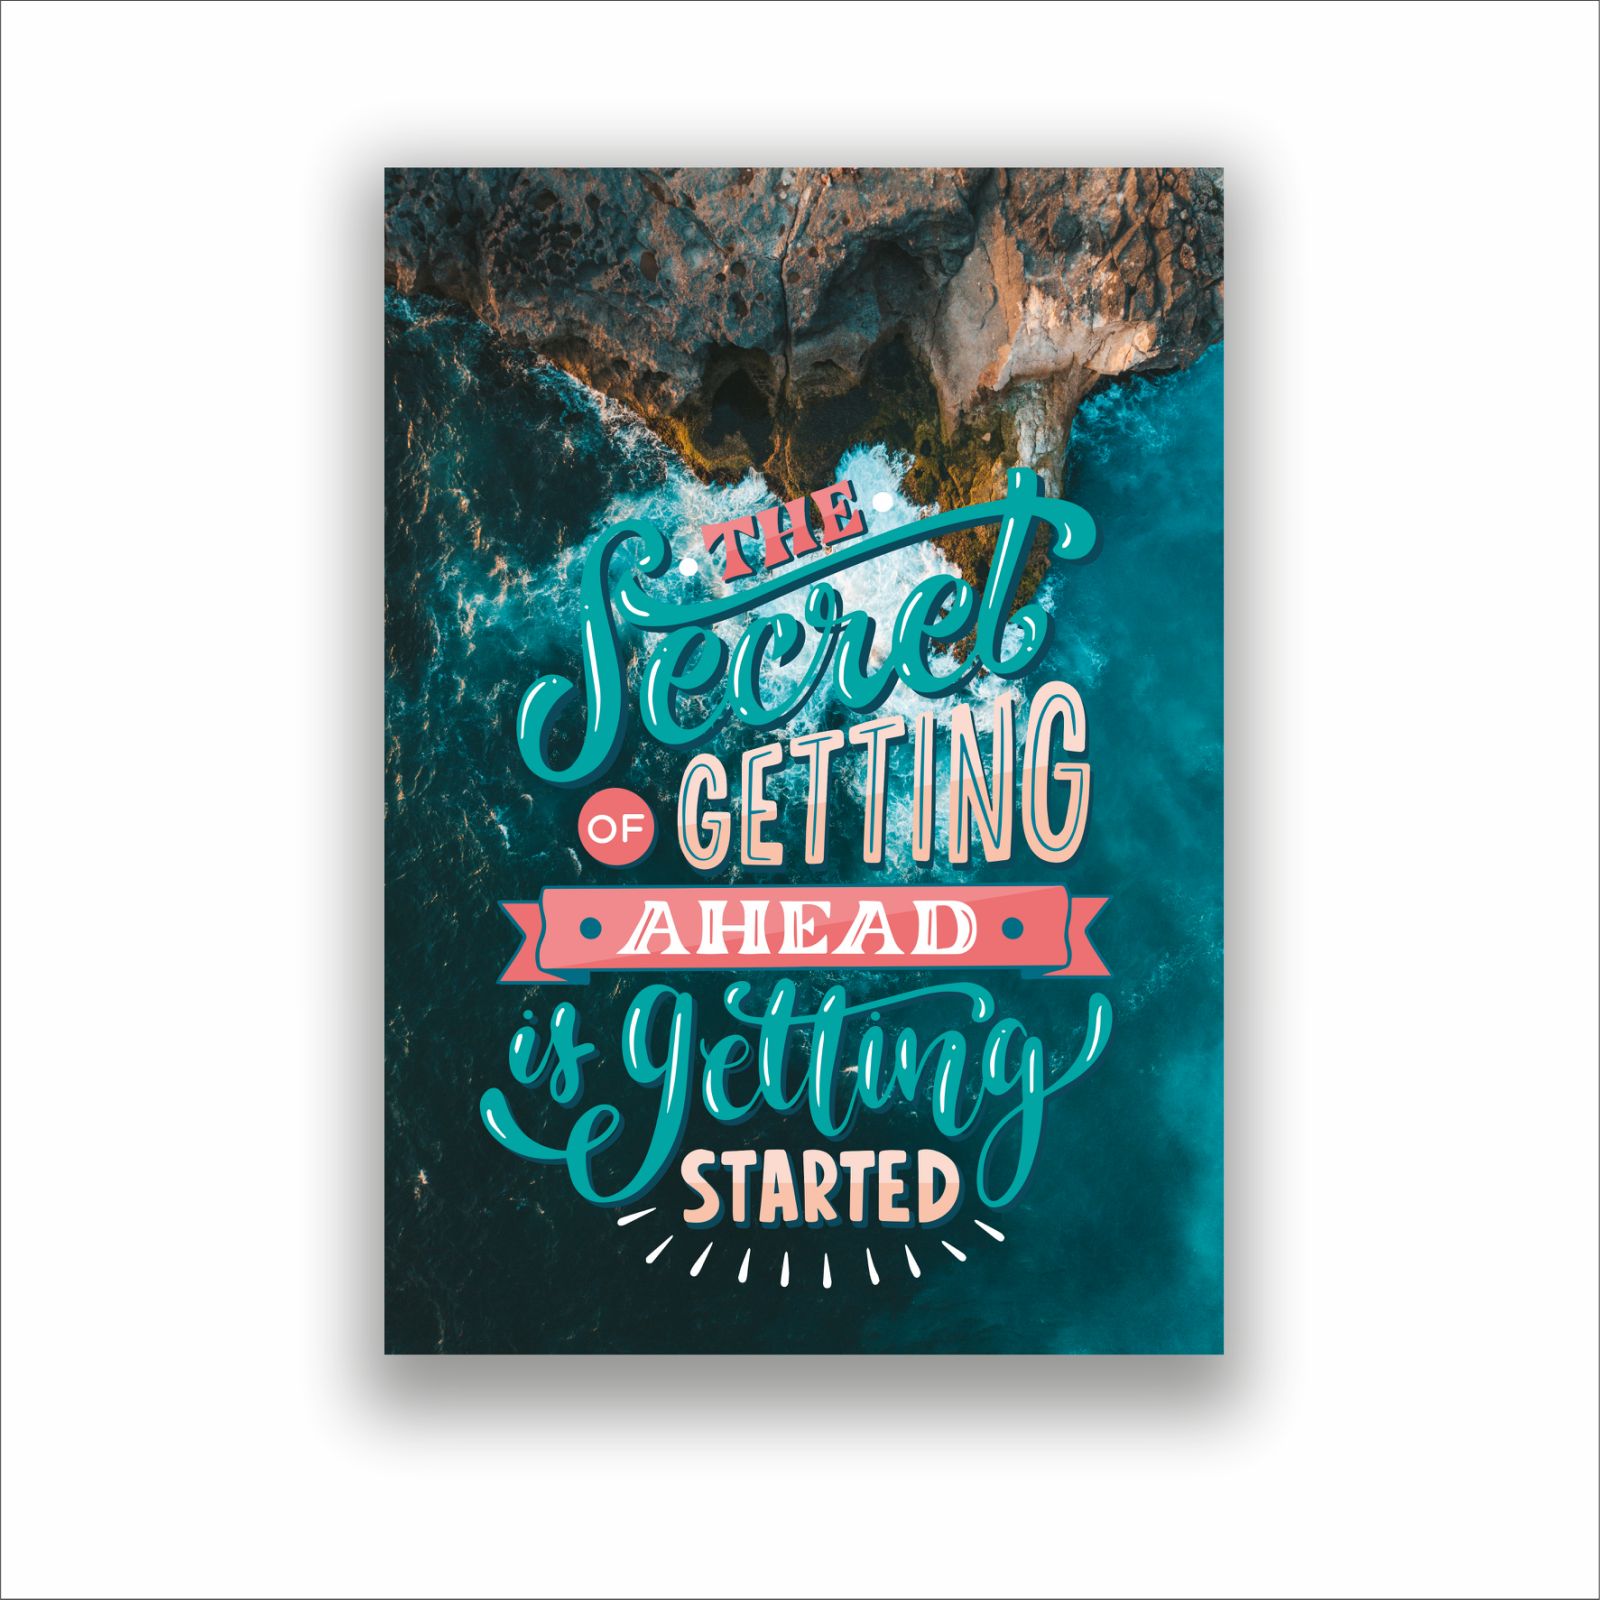 Плакат “The secret of getting ahead is getting started” А1